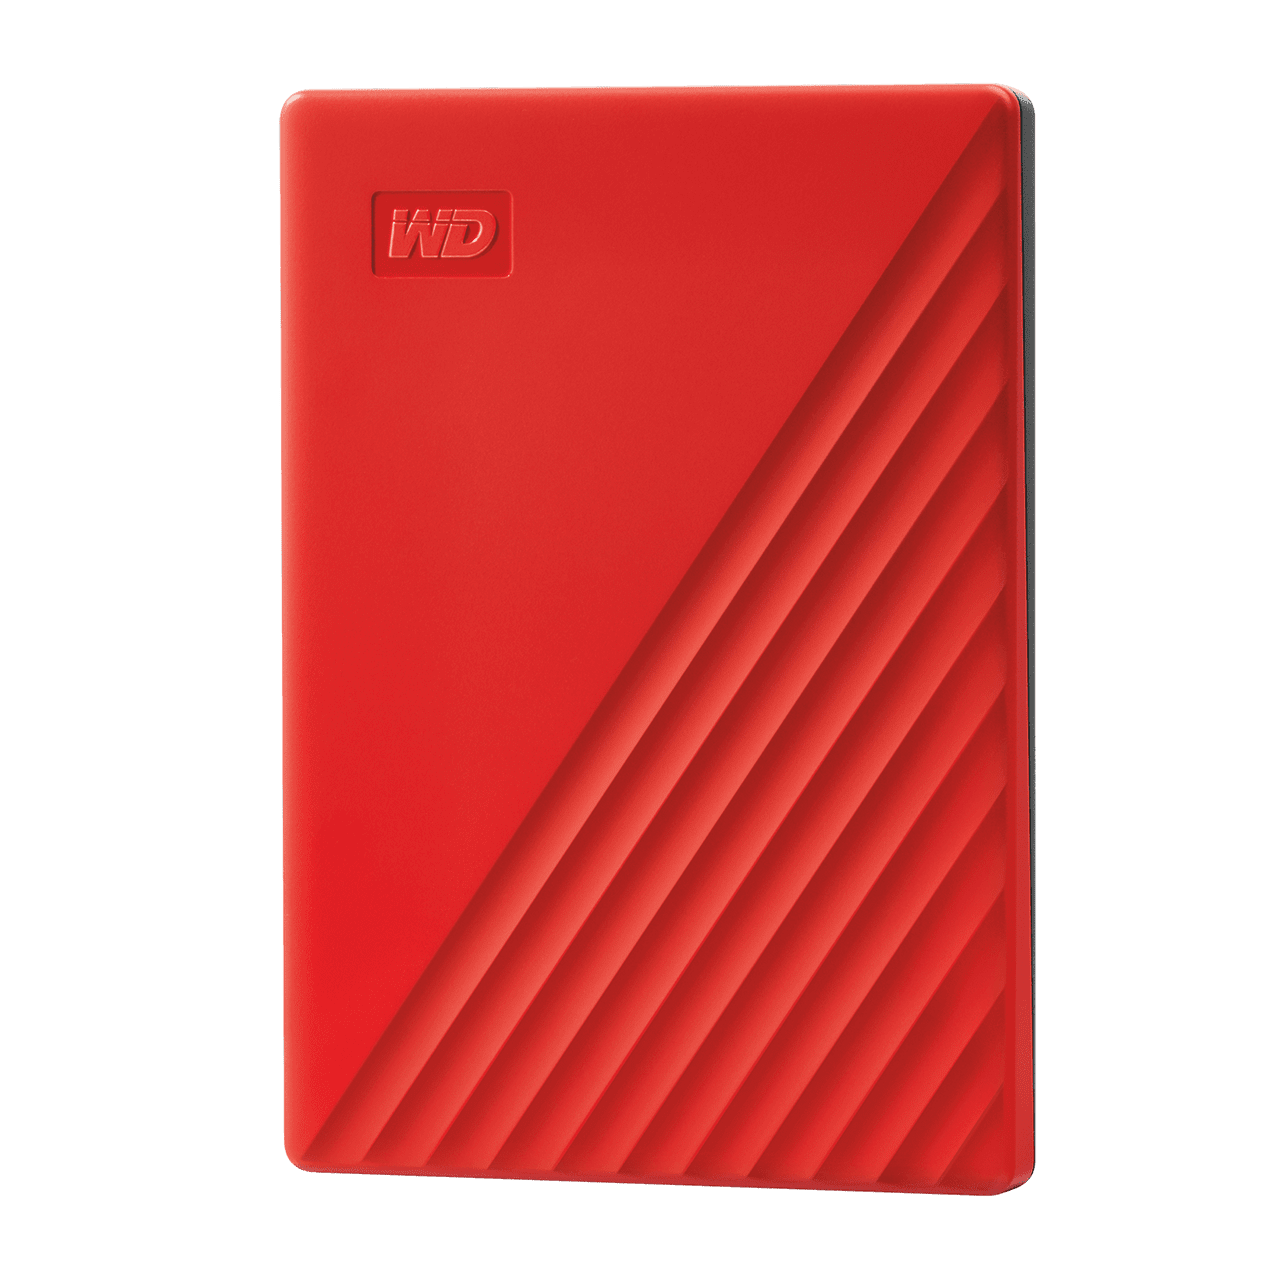 WD Western Digital My Passport 1TB (Red) Slim Portable External Hard Disk USB 3.0 With WD Backup Software & Password Protection